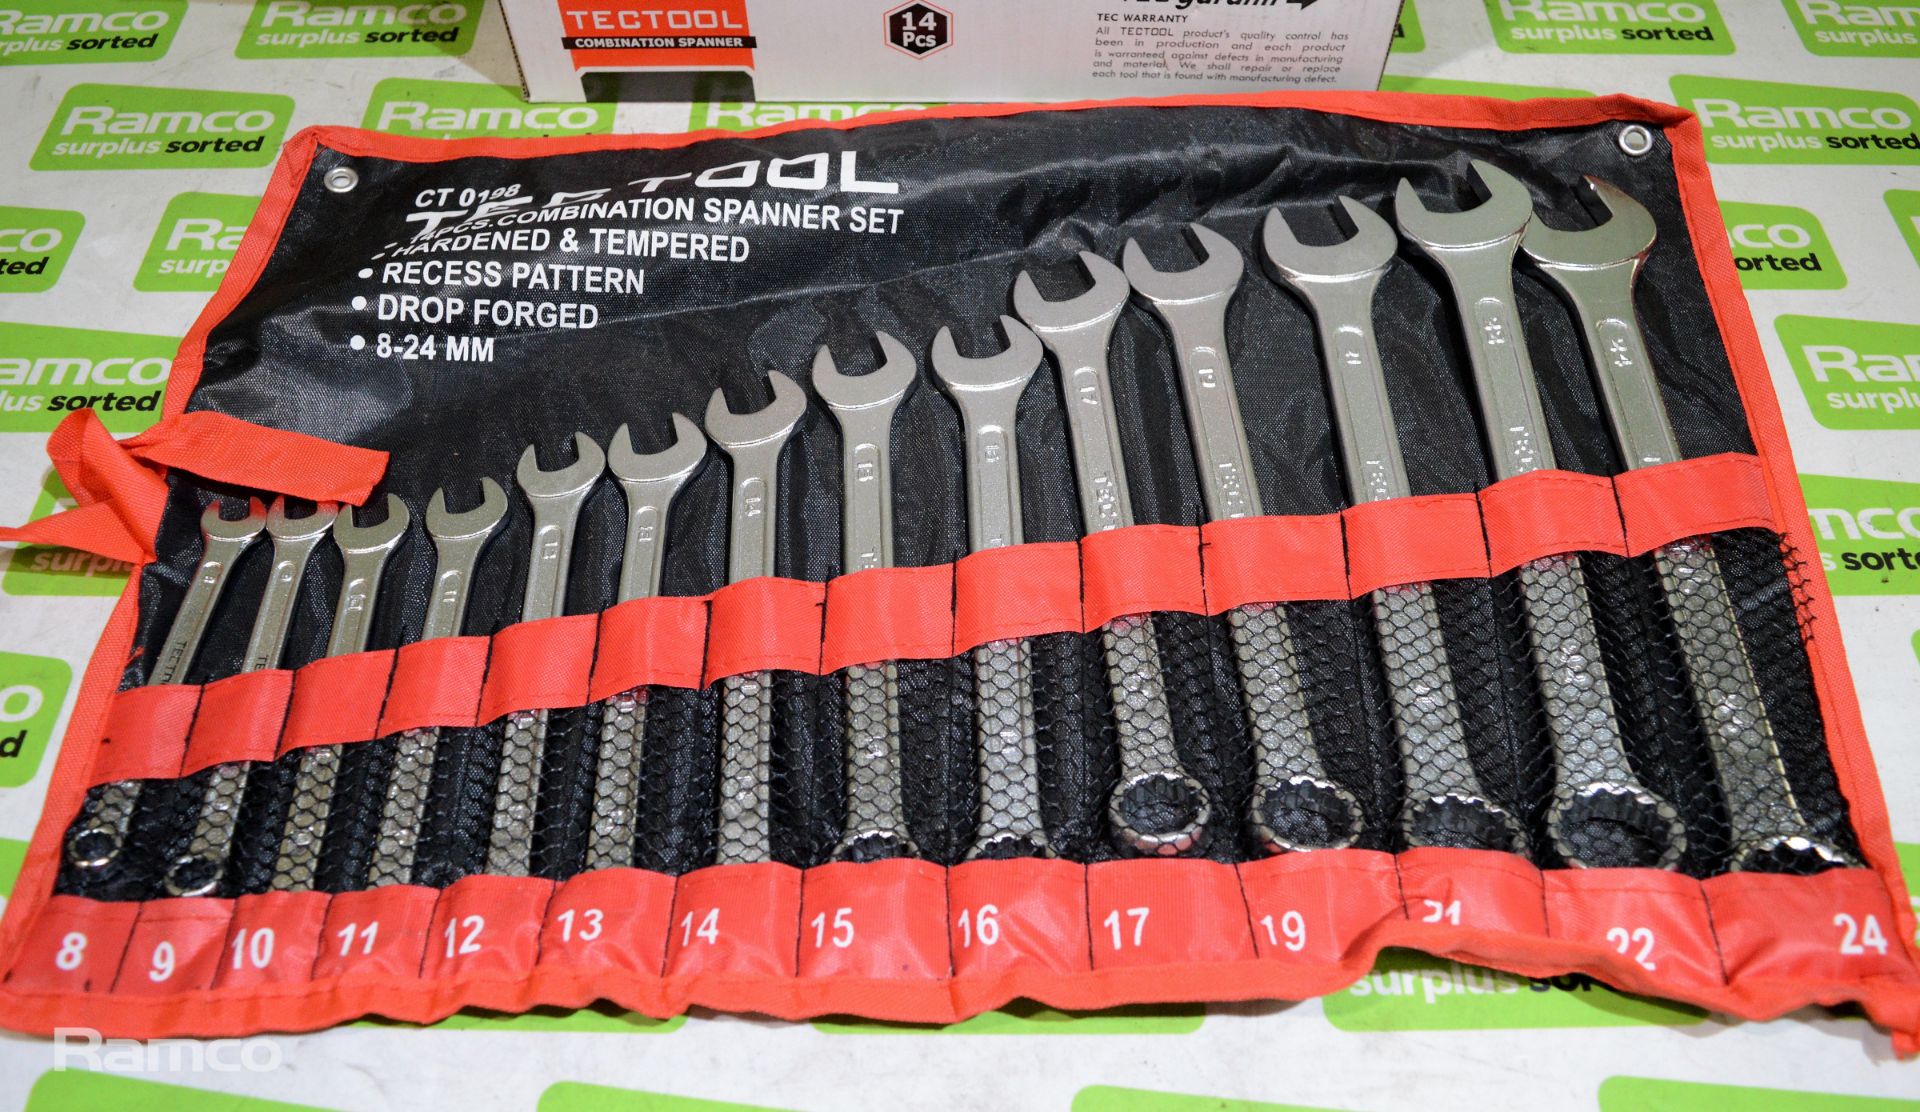 3x Tectool 14 piece combination spanner sets - Image 2 of 2